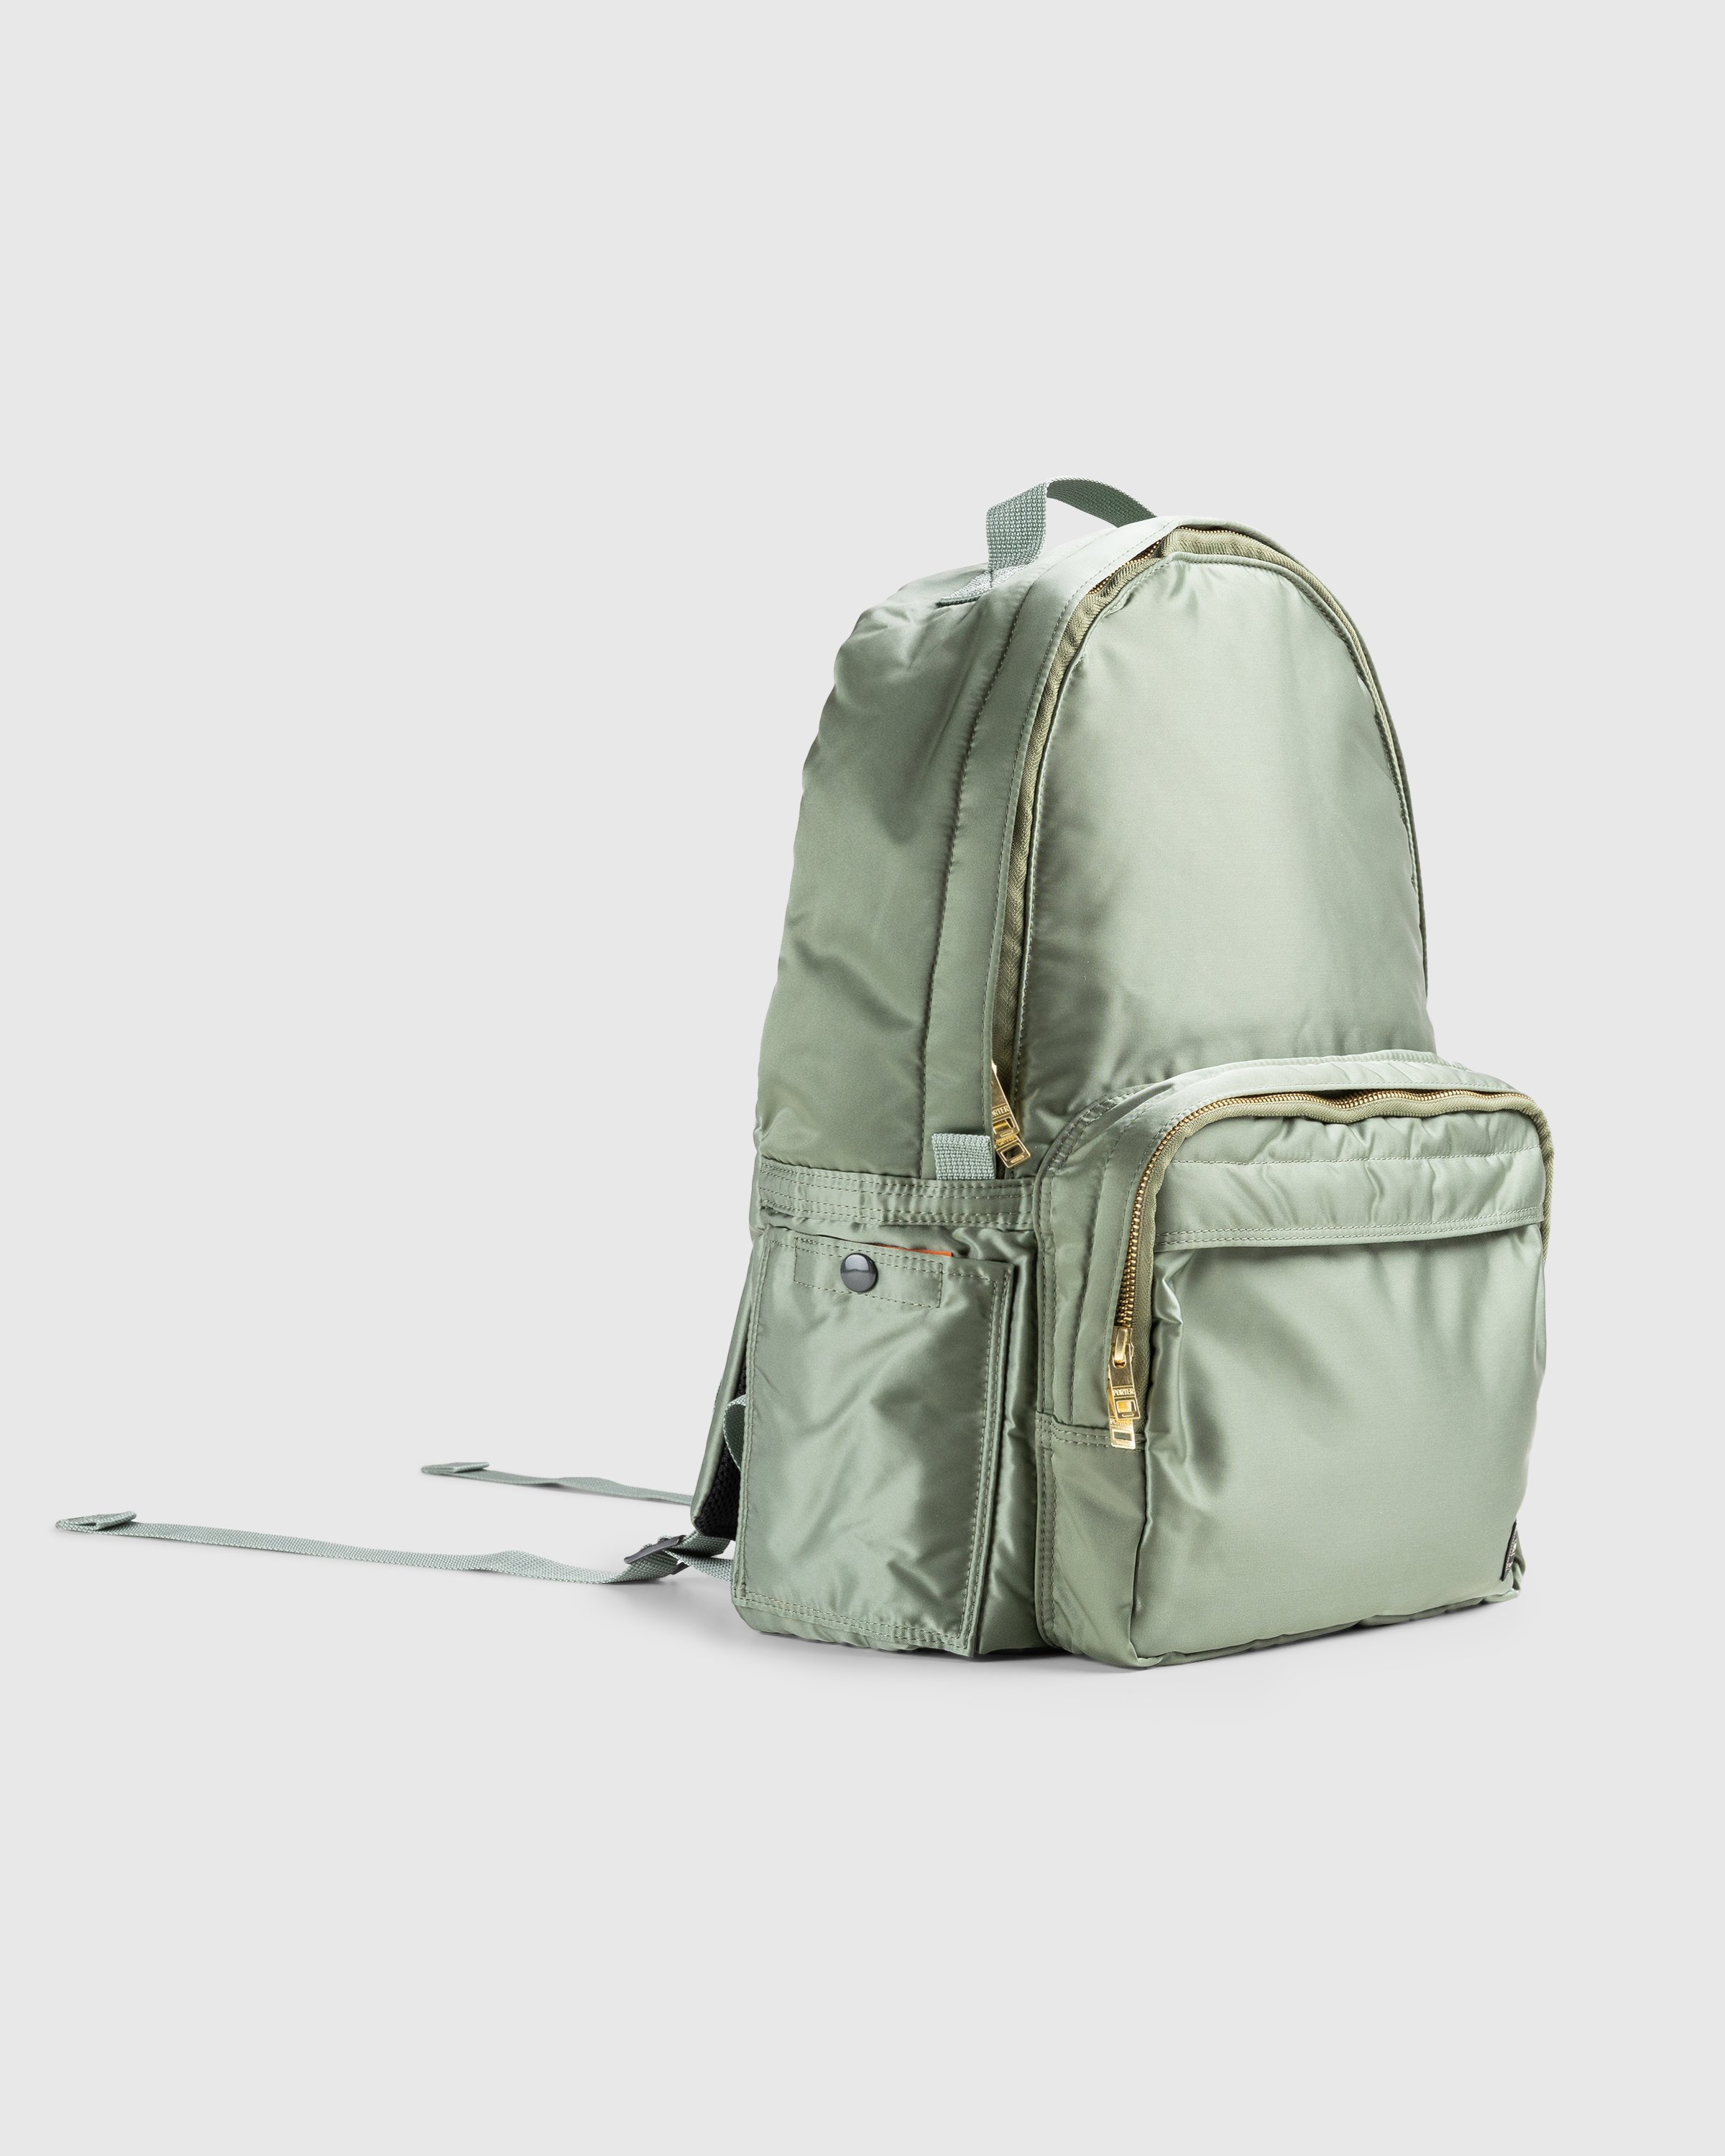 Porter-Yoshida & Co. - Tanker Day Pack - Accessories - Green - Image 3